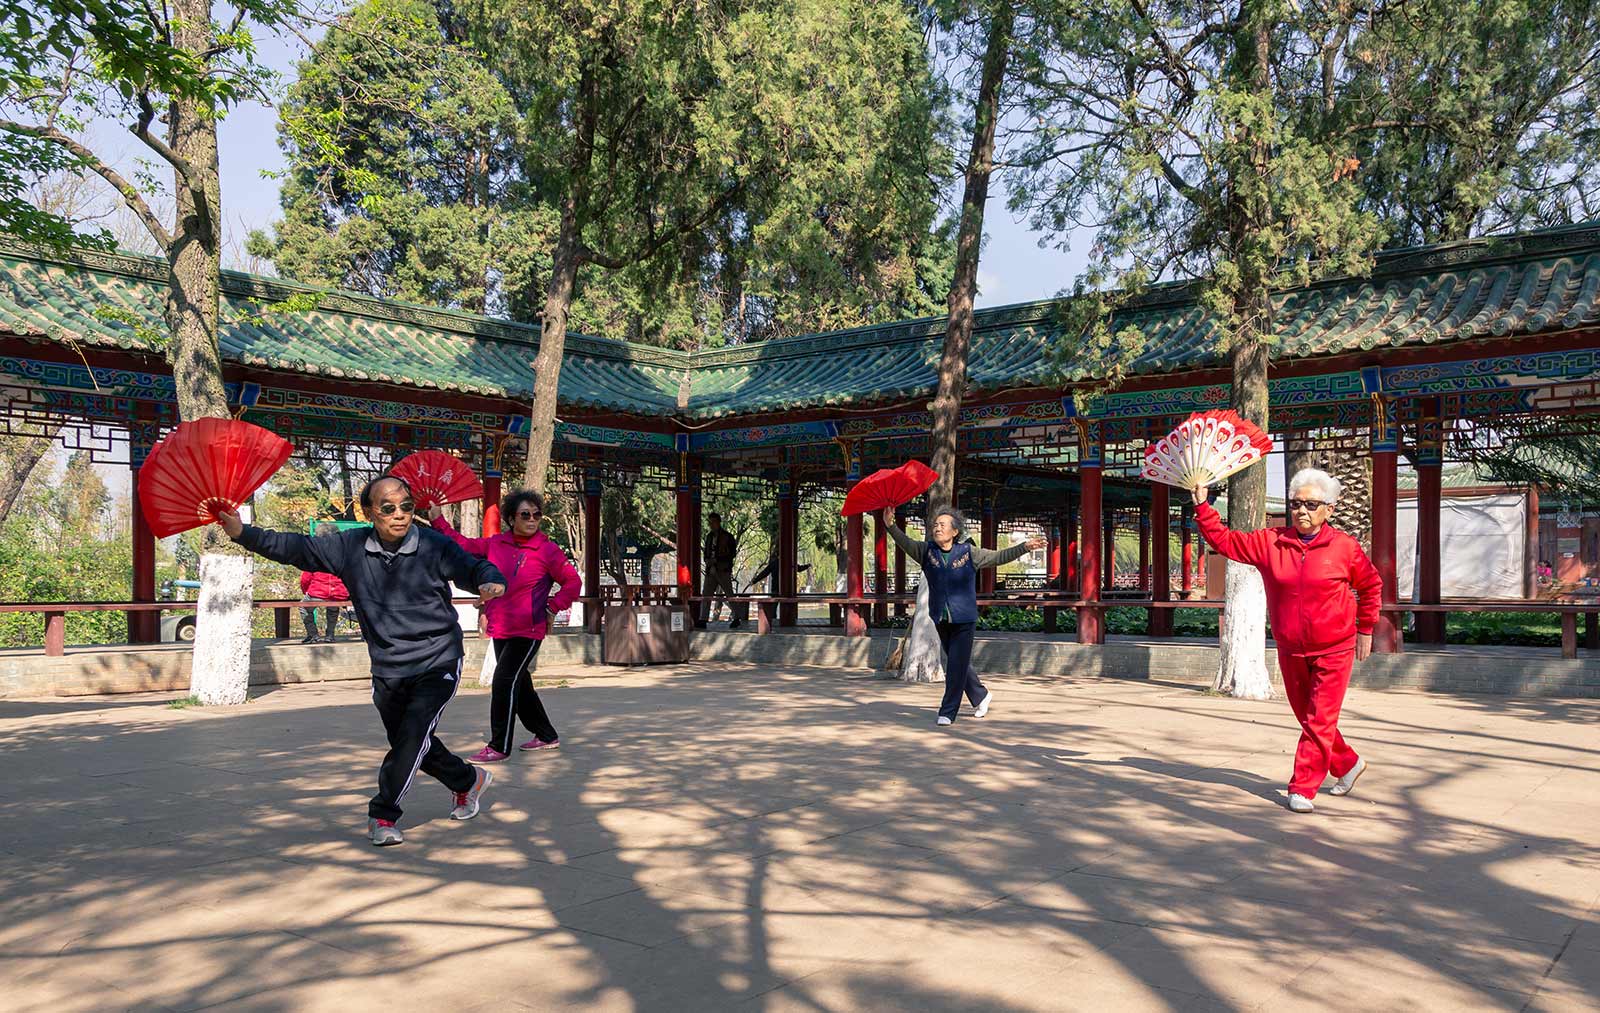 Locals playing tai chi in Kunming park